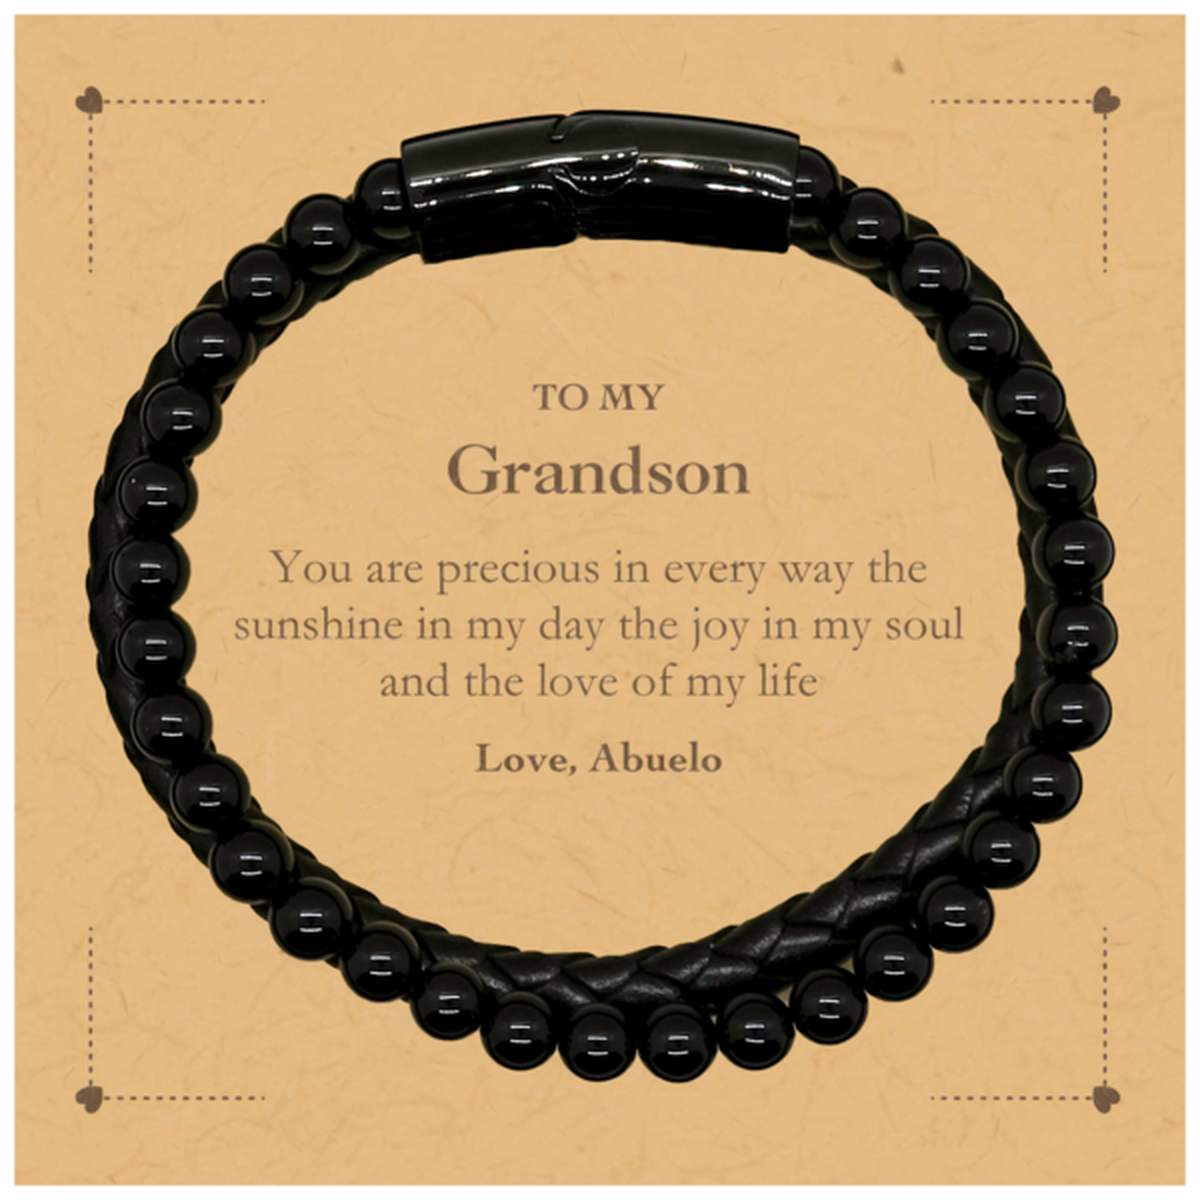 Graduation Gifts for Grandson Stone Leather Bracelets Present from Abuelo, Christmas Grandson Birthday Gifts Grandson You are precious in every way the sunshine in my day. Love, Abuelo